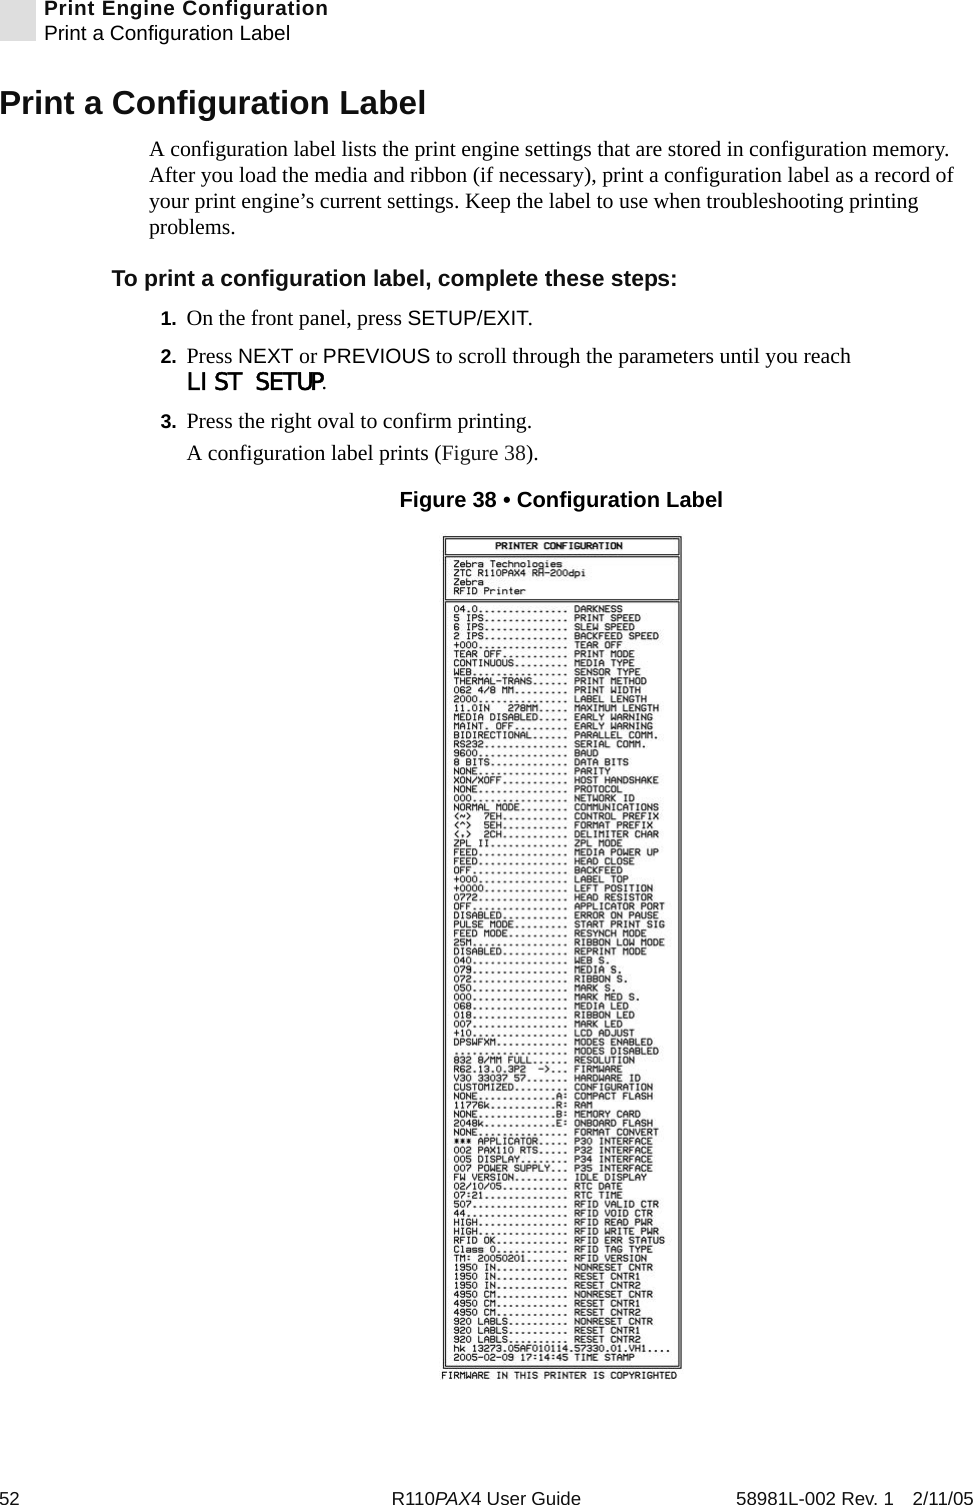 52 R110PAX4 User Guide 58981L-002 Rev. 1 2/11/05Print Engine ConfigurationPrint a Configuration LabelPrint a Configuration LabelA configuration label lists the print engine settings that are stored in configuration memory. After you load the media and ribbon (if necessary), print a configuration label as a record of your print engine’s current settings. Keep the label to use when troubleshooting printing problems.To print a configuration label, complete these steps:1. On the front panel, press SETUP/EXIT.2. Press NEXT or PREVIOUS to scroll through the parameters until you reach LIST SETUP.3. Press the right oval to confirm printing.A configuration label prints (Figure 38).Figure 38 • Configuration Label